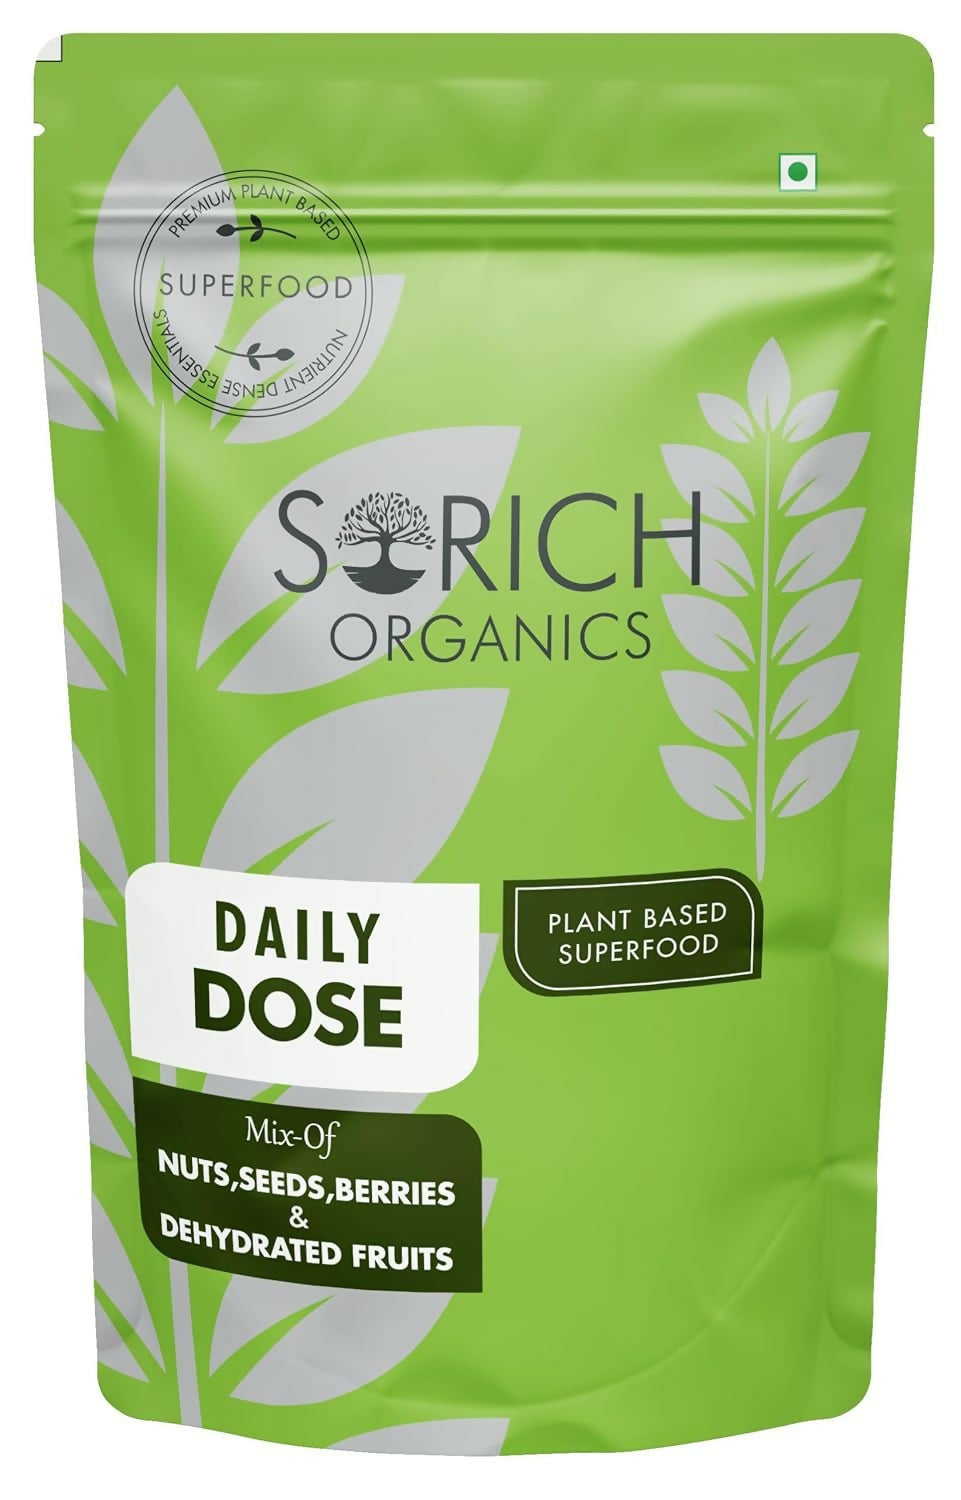 Sorich Organics Daily Dose Mix Nuts, Seeds and Berries - BUDNE